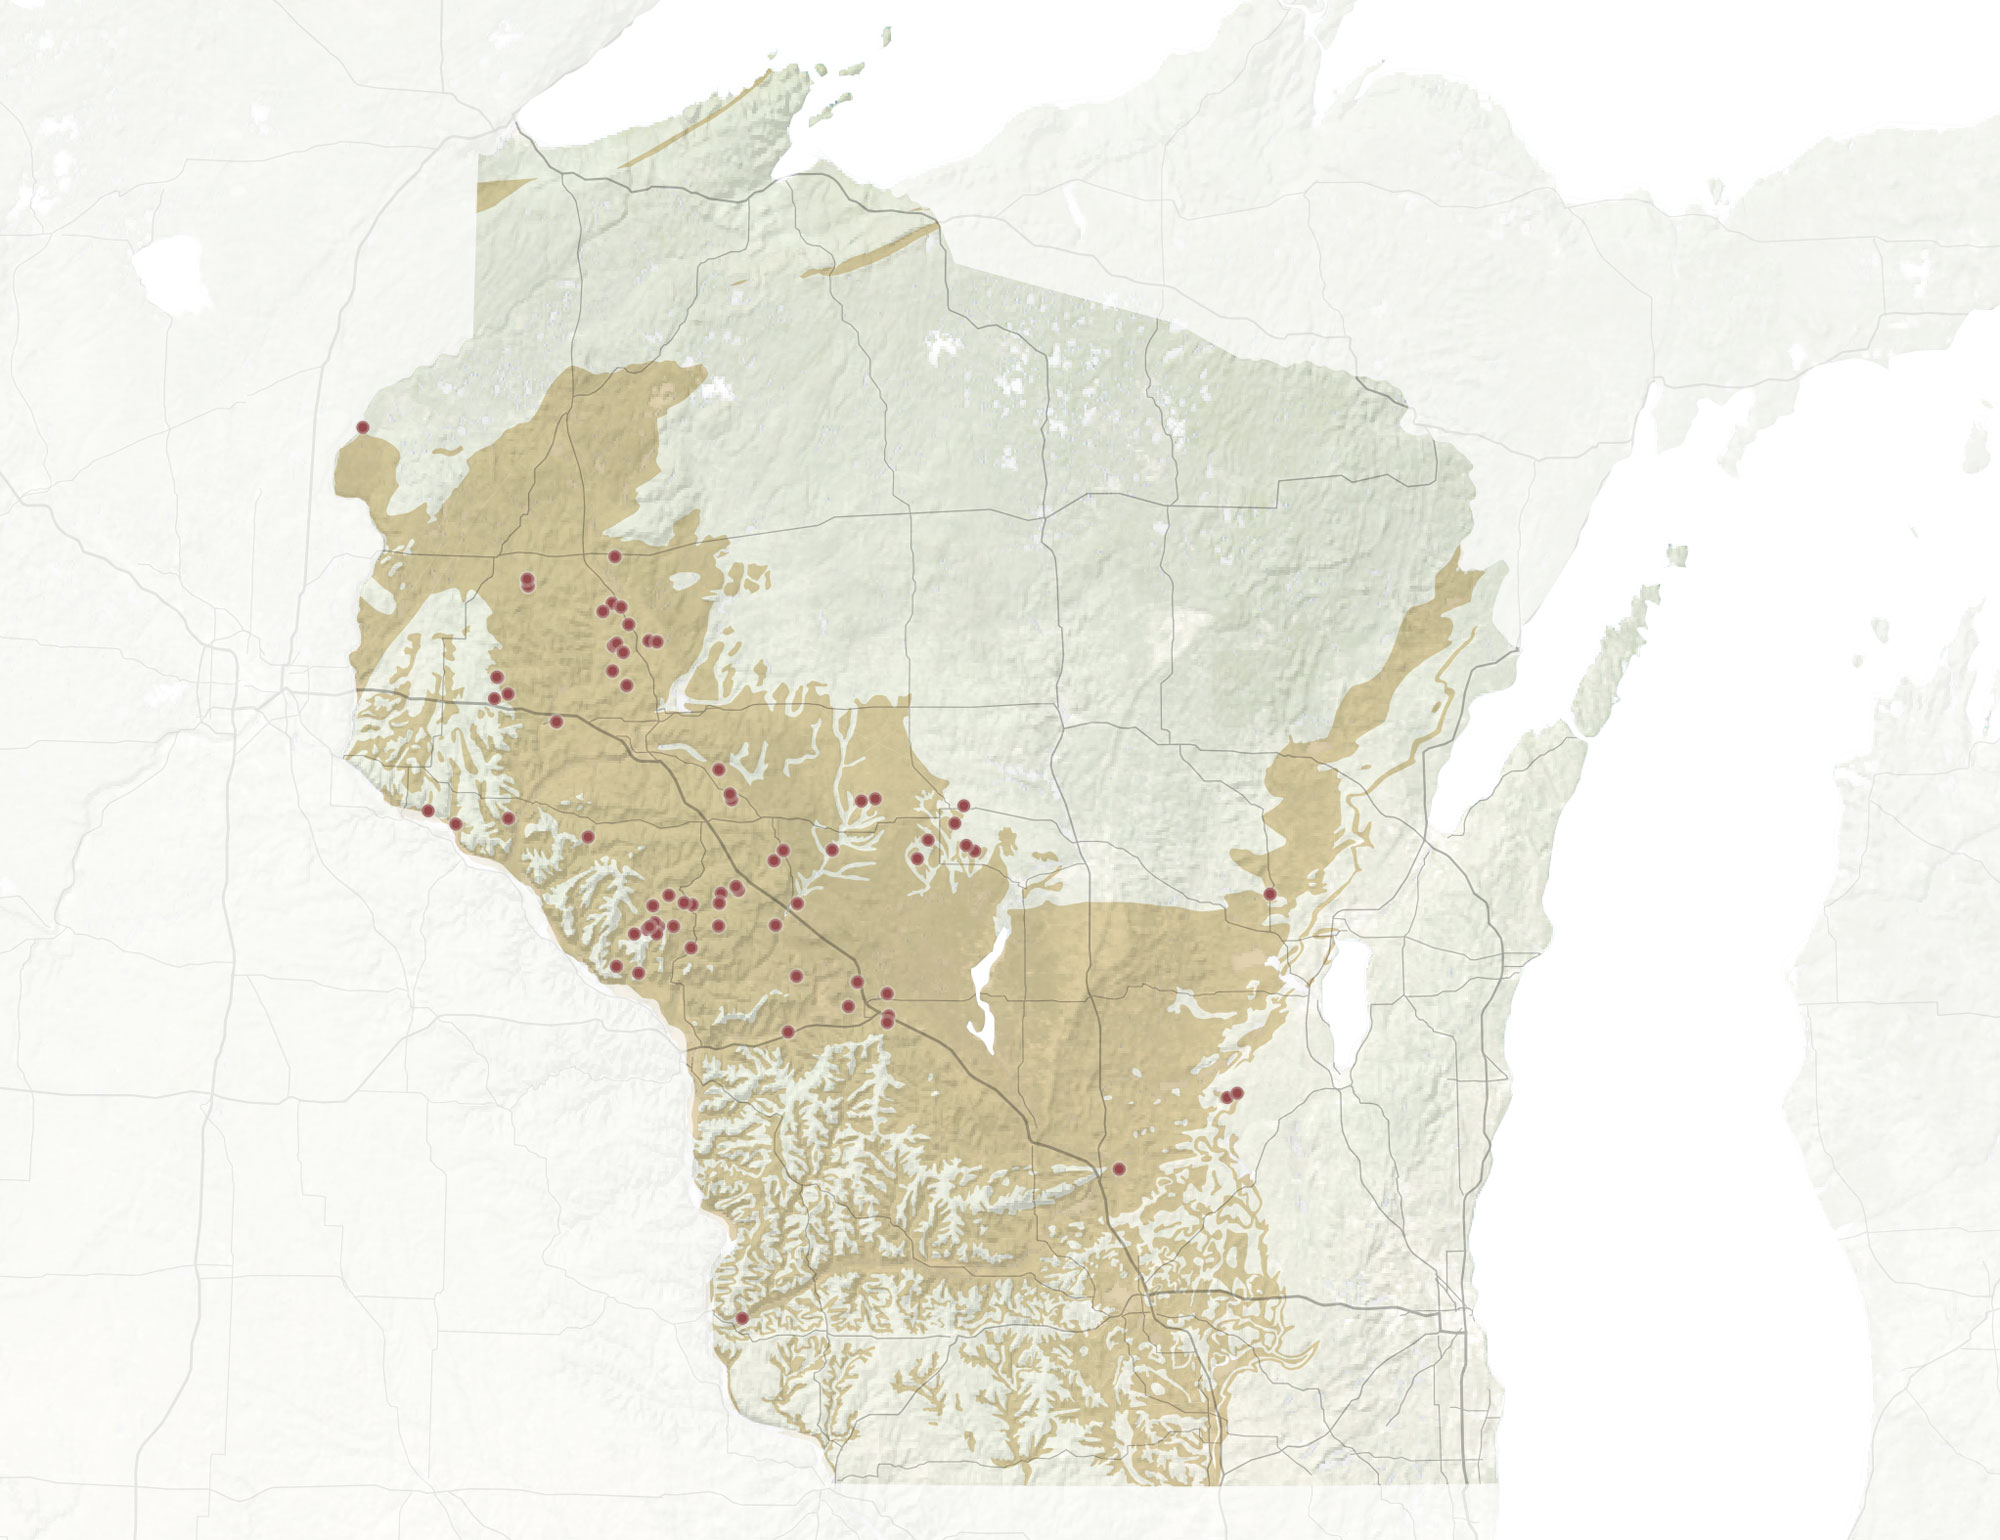 Relief map of Wisconsin showing the location of sand deposits, which are shaded beige, and sand mines, represented by red dots. Sand deposits occur in western Wisconsin, with a thin band projecting west of the Bay of Green Bay in the eastern part of the state. Most sand mines are located in west-central Wisconsin.